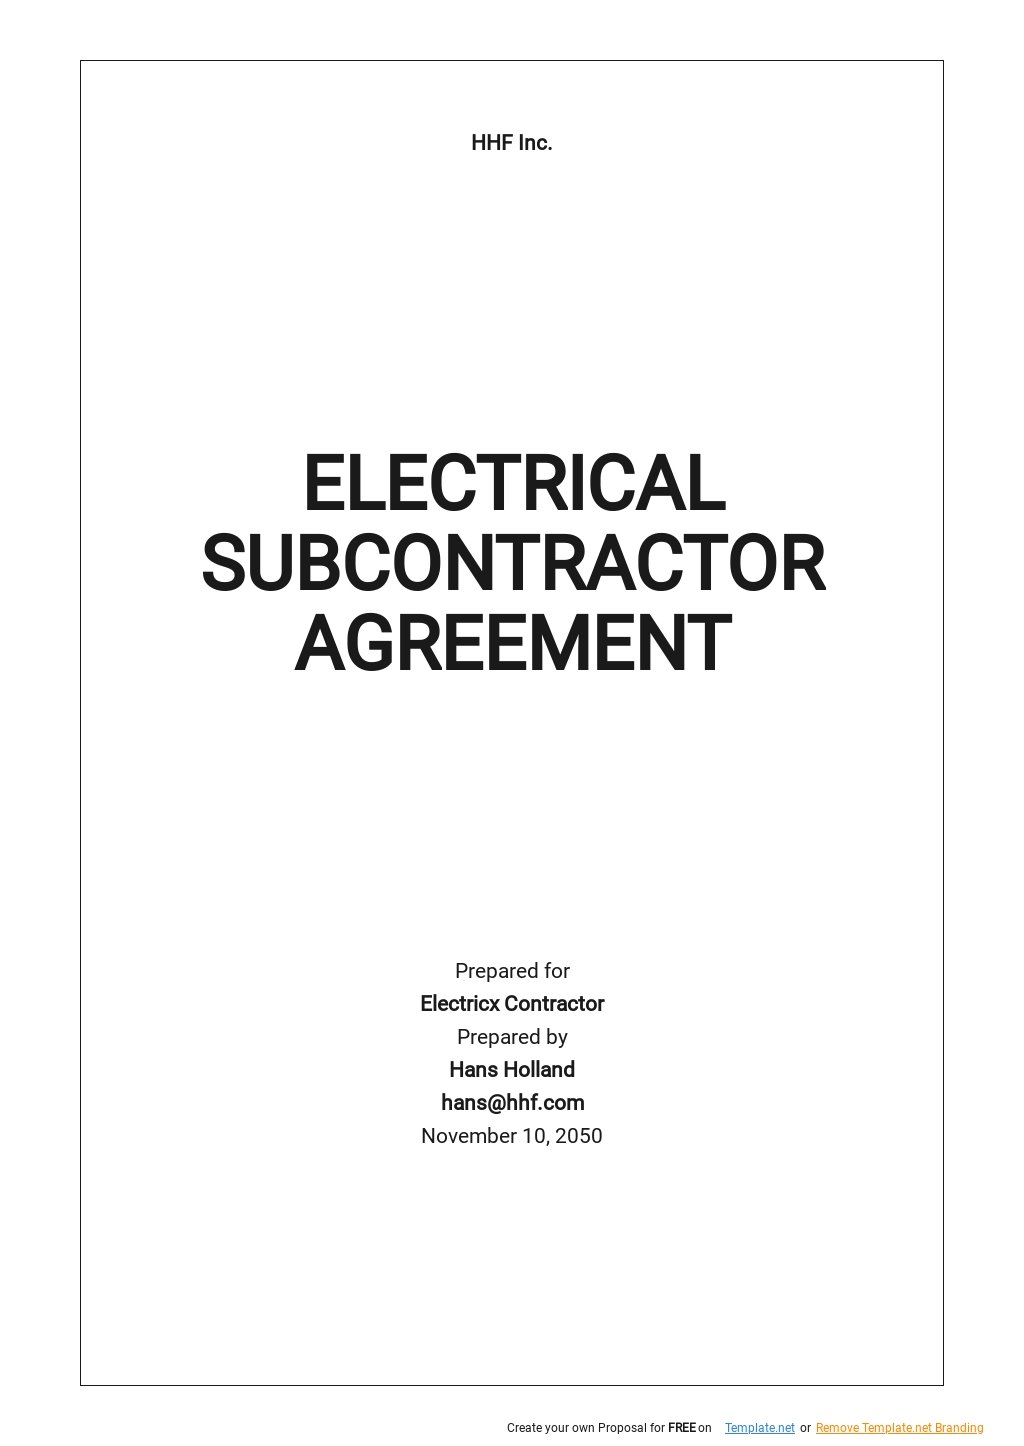 Electrical Subcontractor Agreement Template .jpe